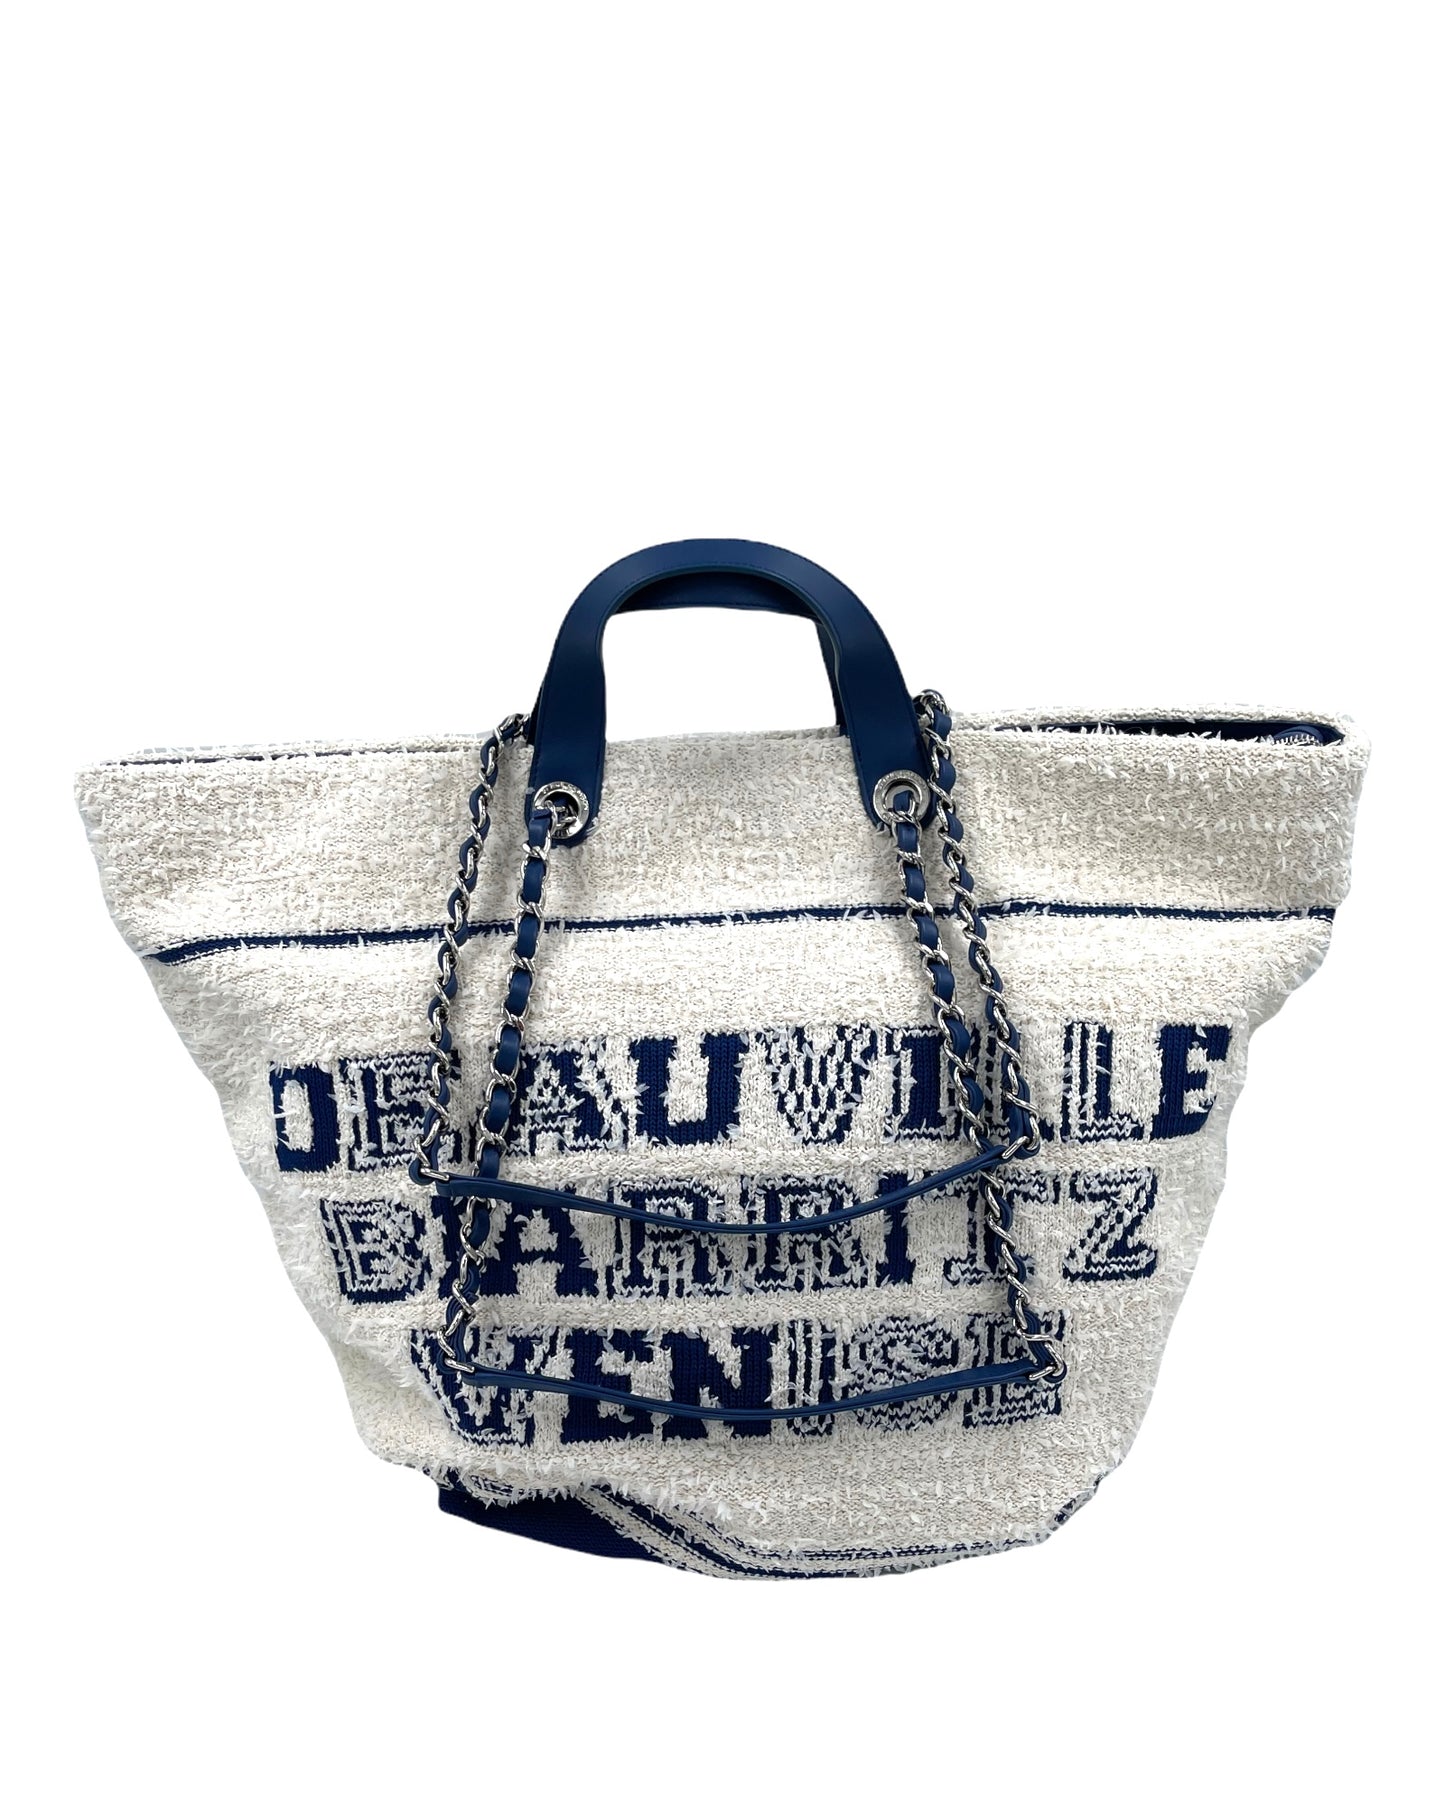 Chanel Deauville Venise Biarritz Shopping Tote Terry Cloth Large